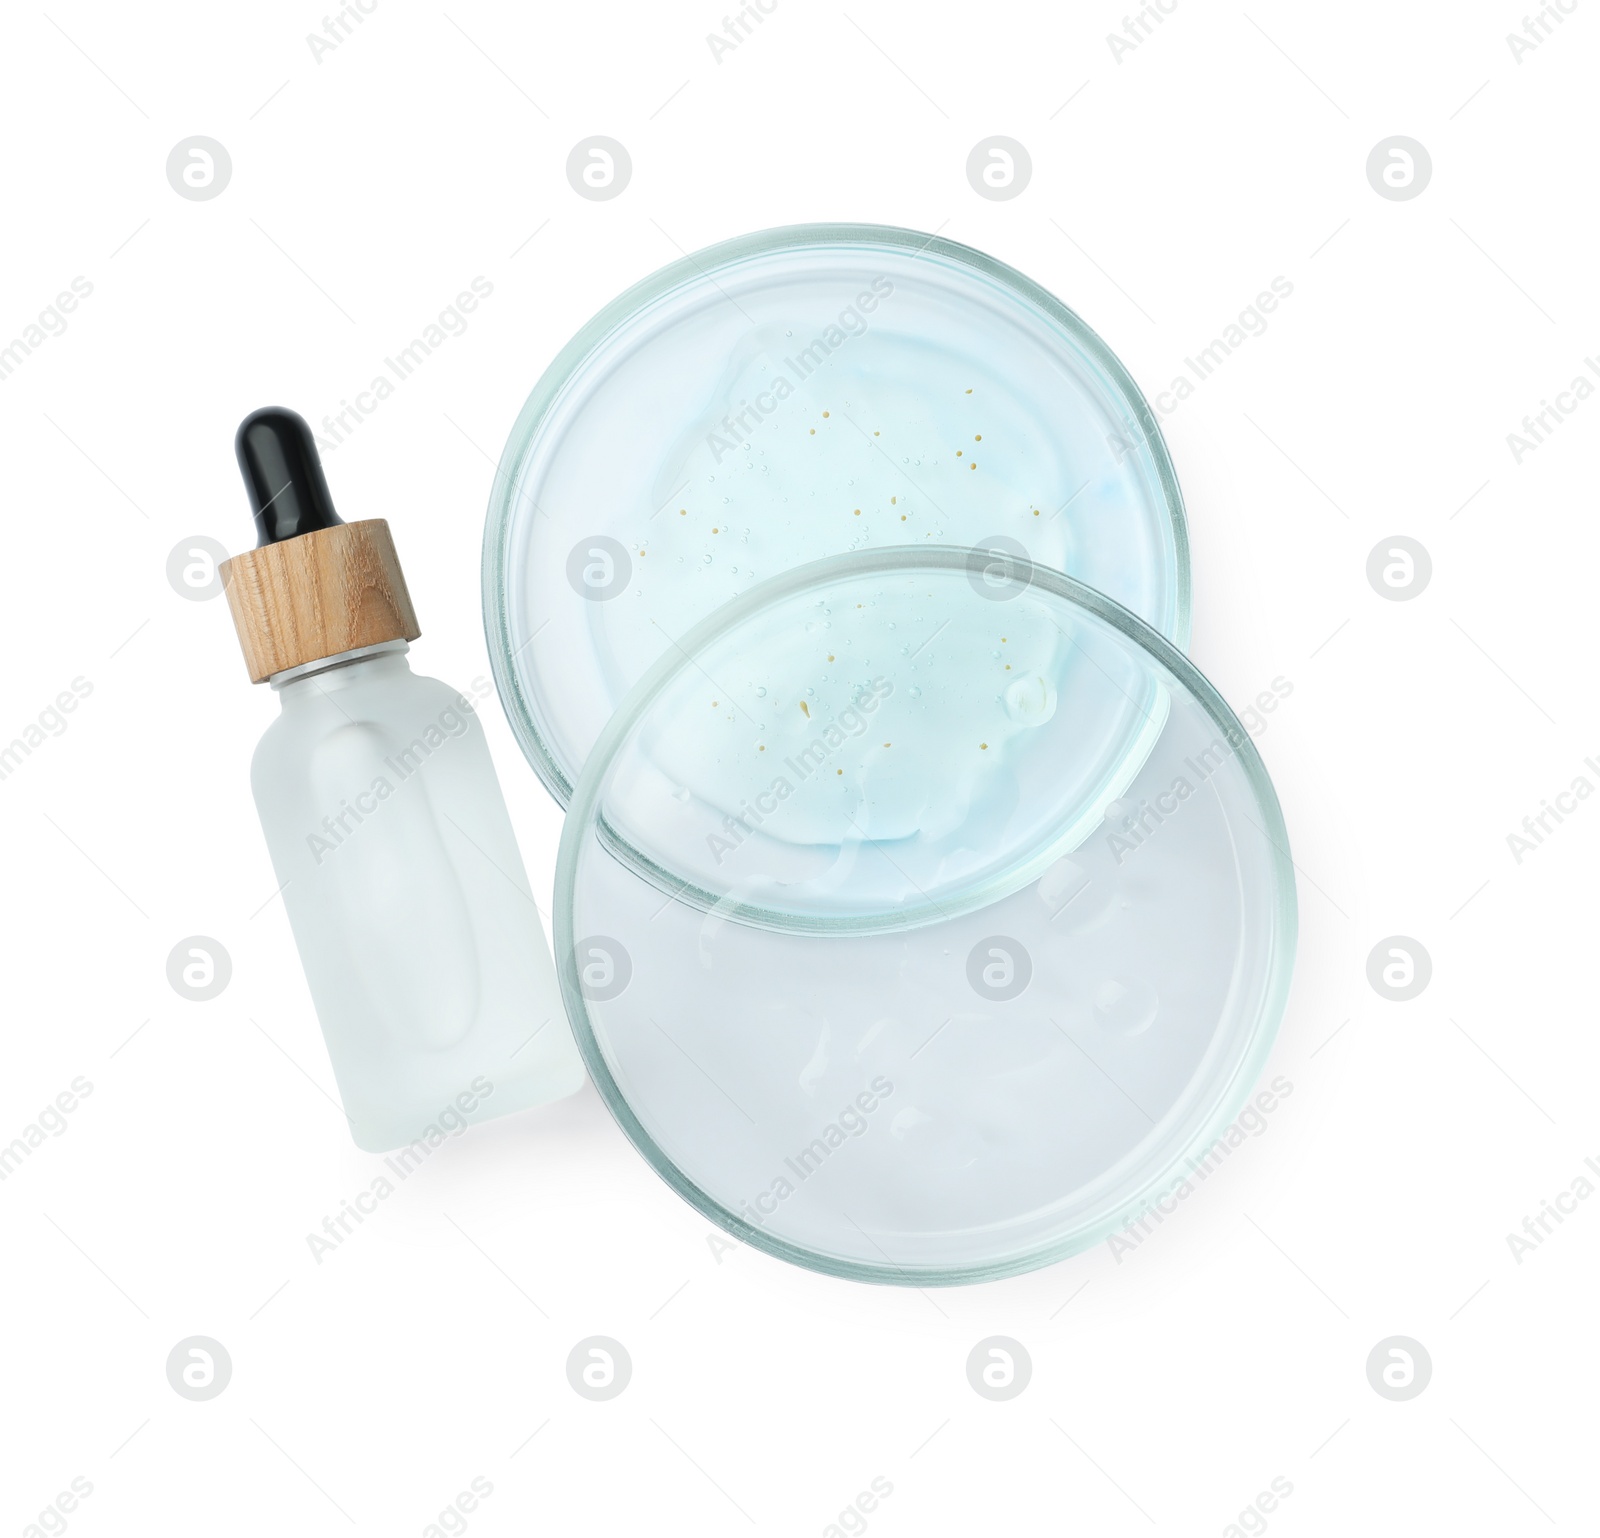 Photo of Petri dishes and cosmetic products on white background, top view